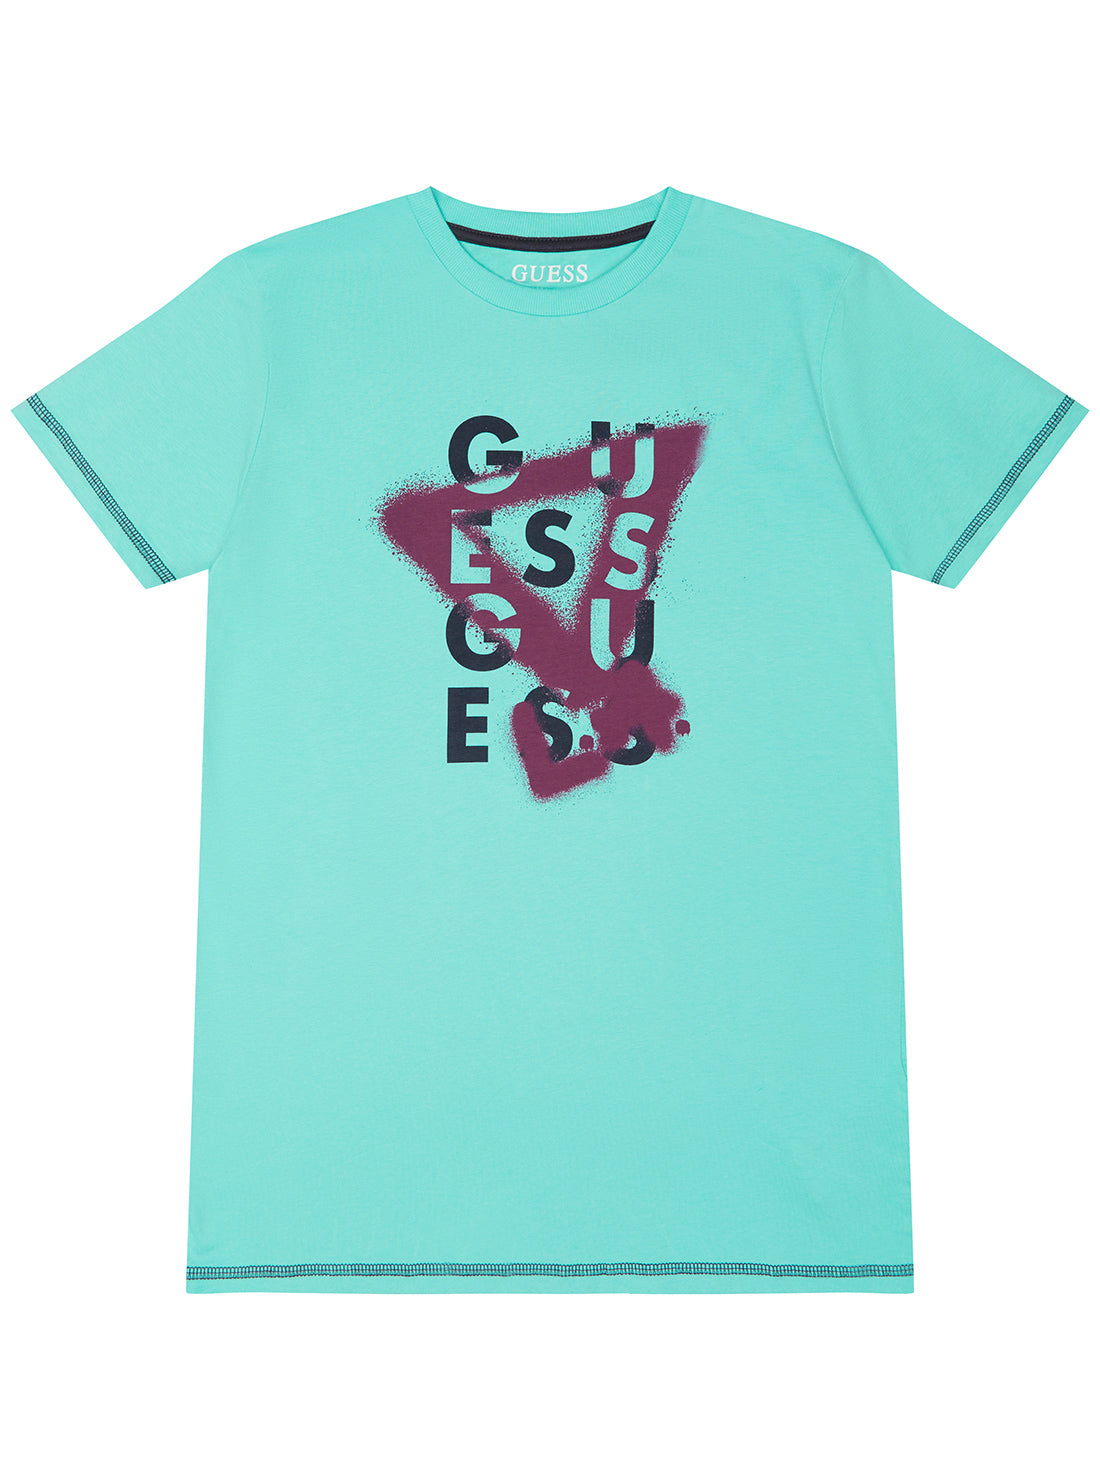 GUESS Pool Blue Logo T-Shirt (7-16) front view